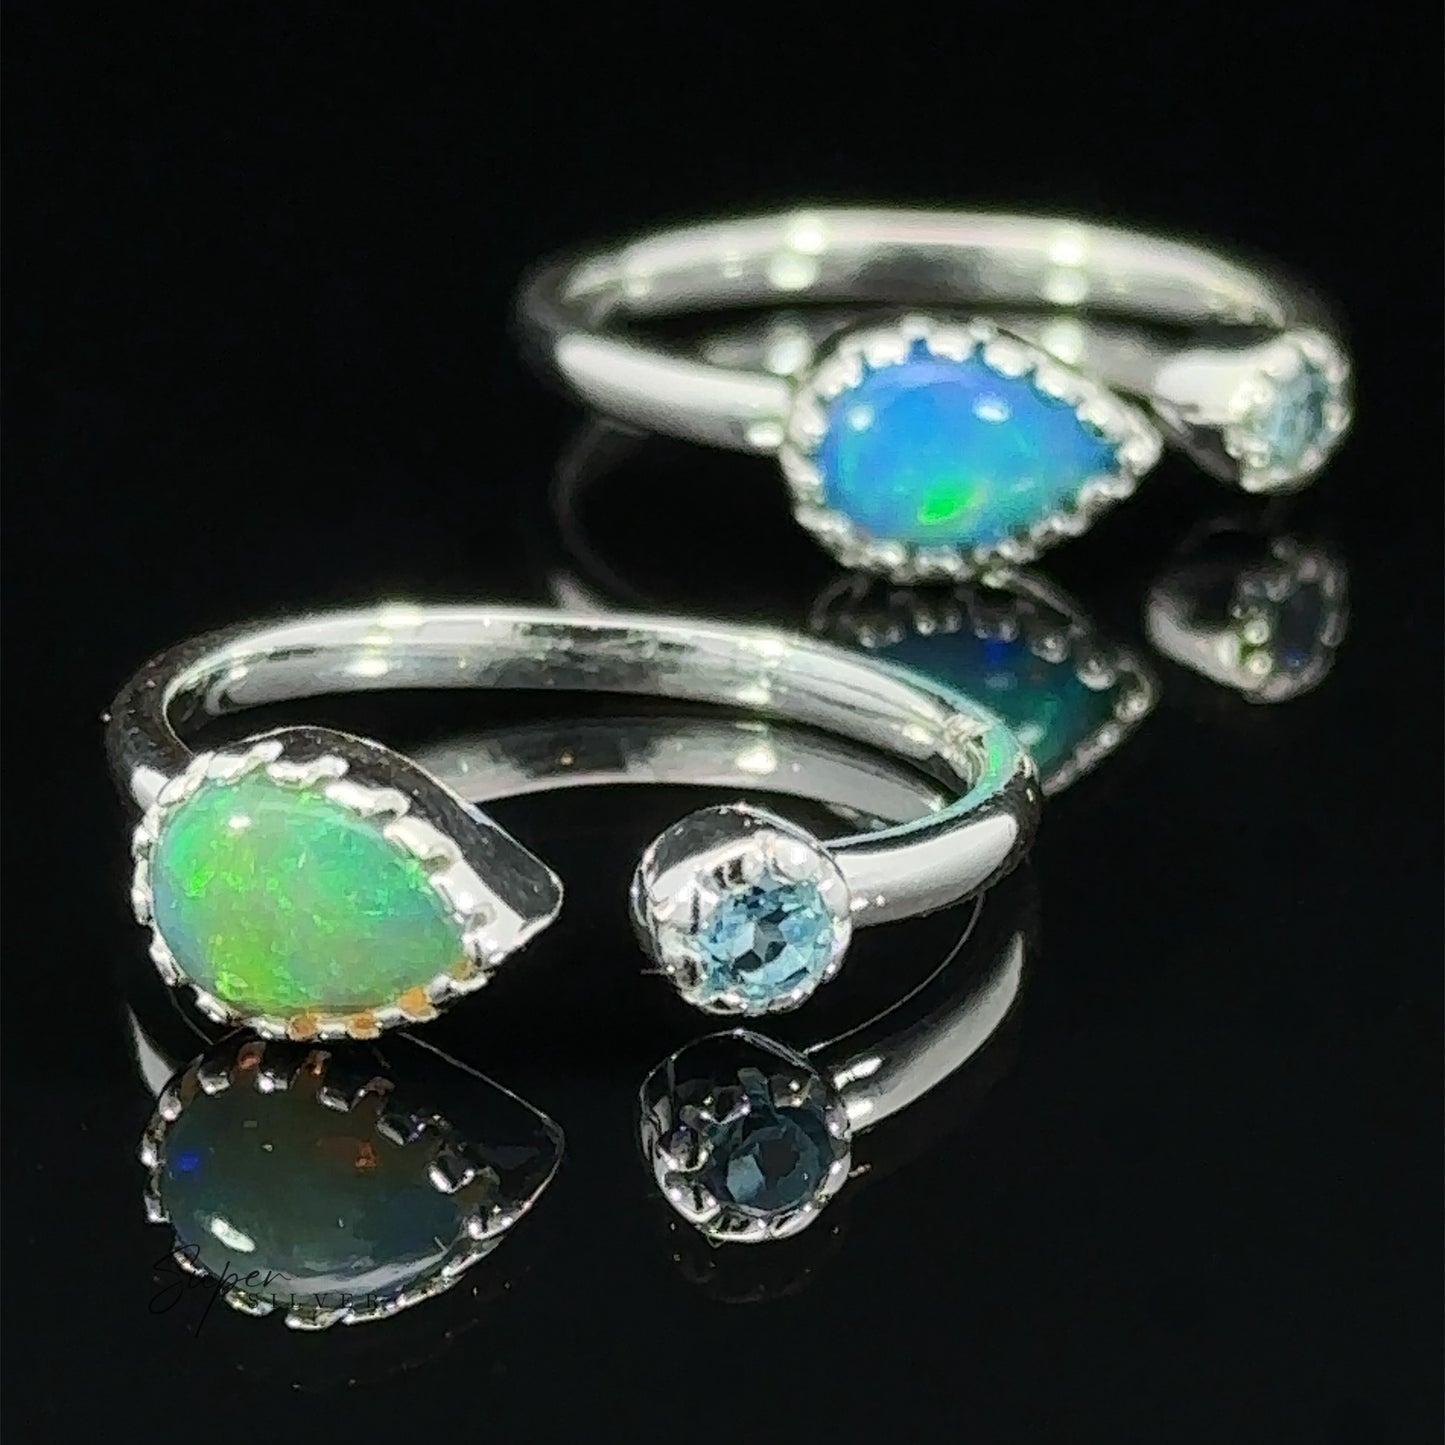 
                  
                    Two dainty adjustable gemstone rings with opal stones and tiny crystals, displayed on a reflective black surface.
                  
                